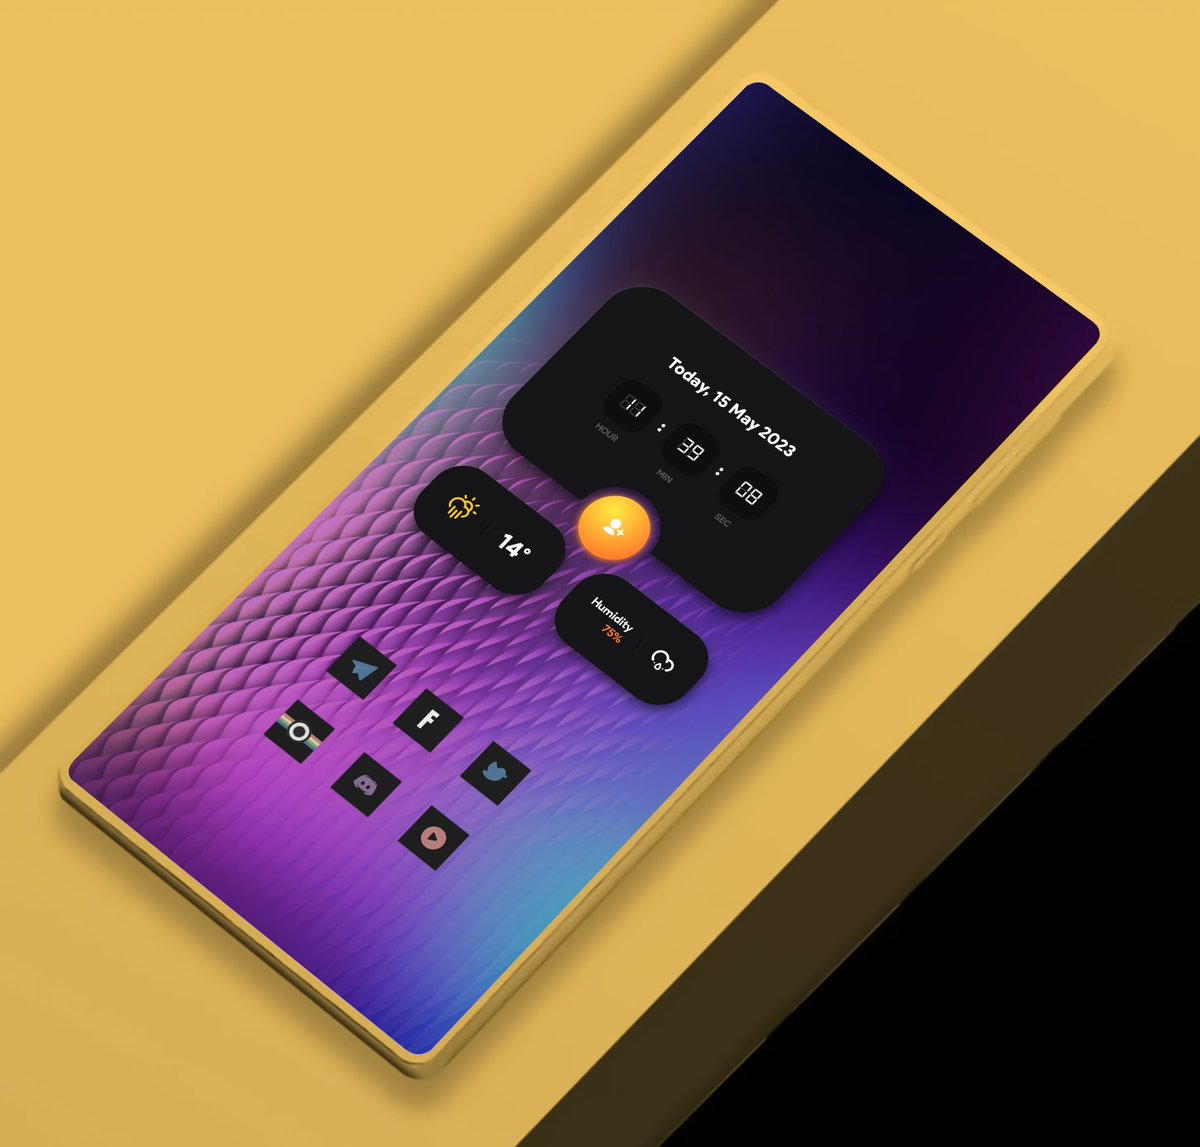 Monday on android 😎

#withnova #ShowTeam♥️ 

• wallpaper @fresk0_ 
• icons @DotDesigns 
• kwgt widget @21MaRcO12 
• hishoot template @andro_idfans